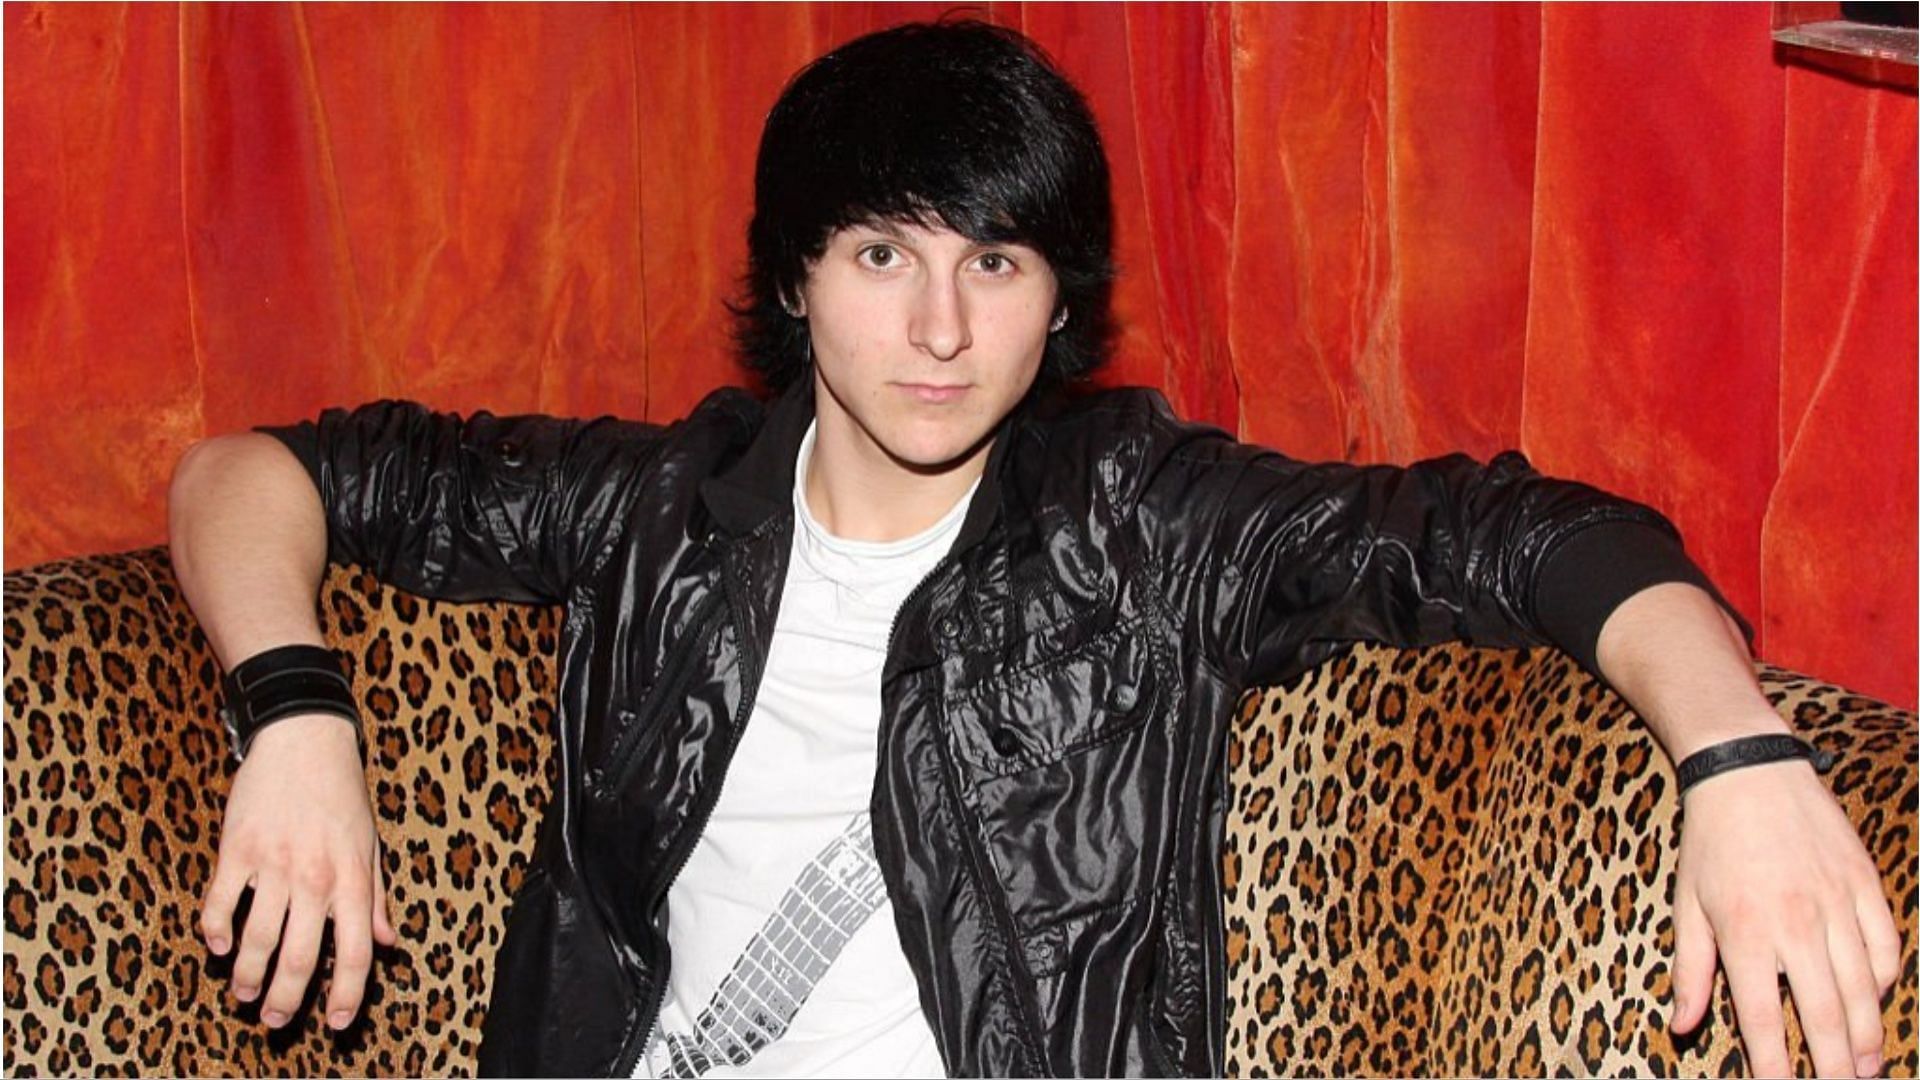 Mitchel Musso has been arrested on some severe charges (Image via Bruce Glikas/Getty Images)